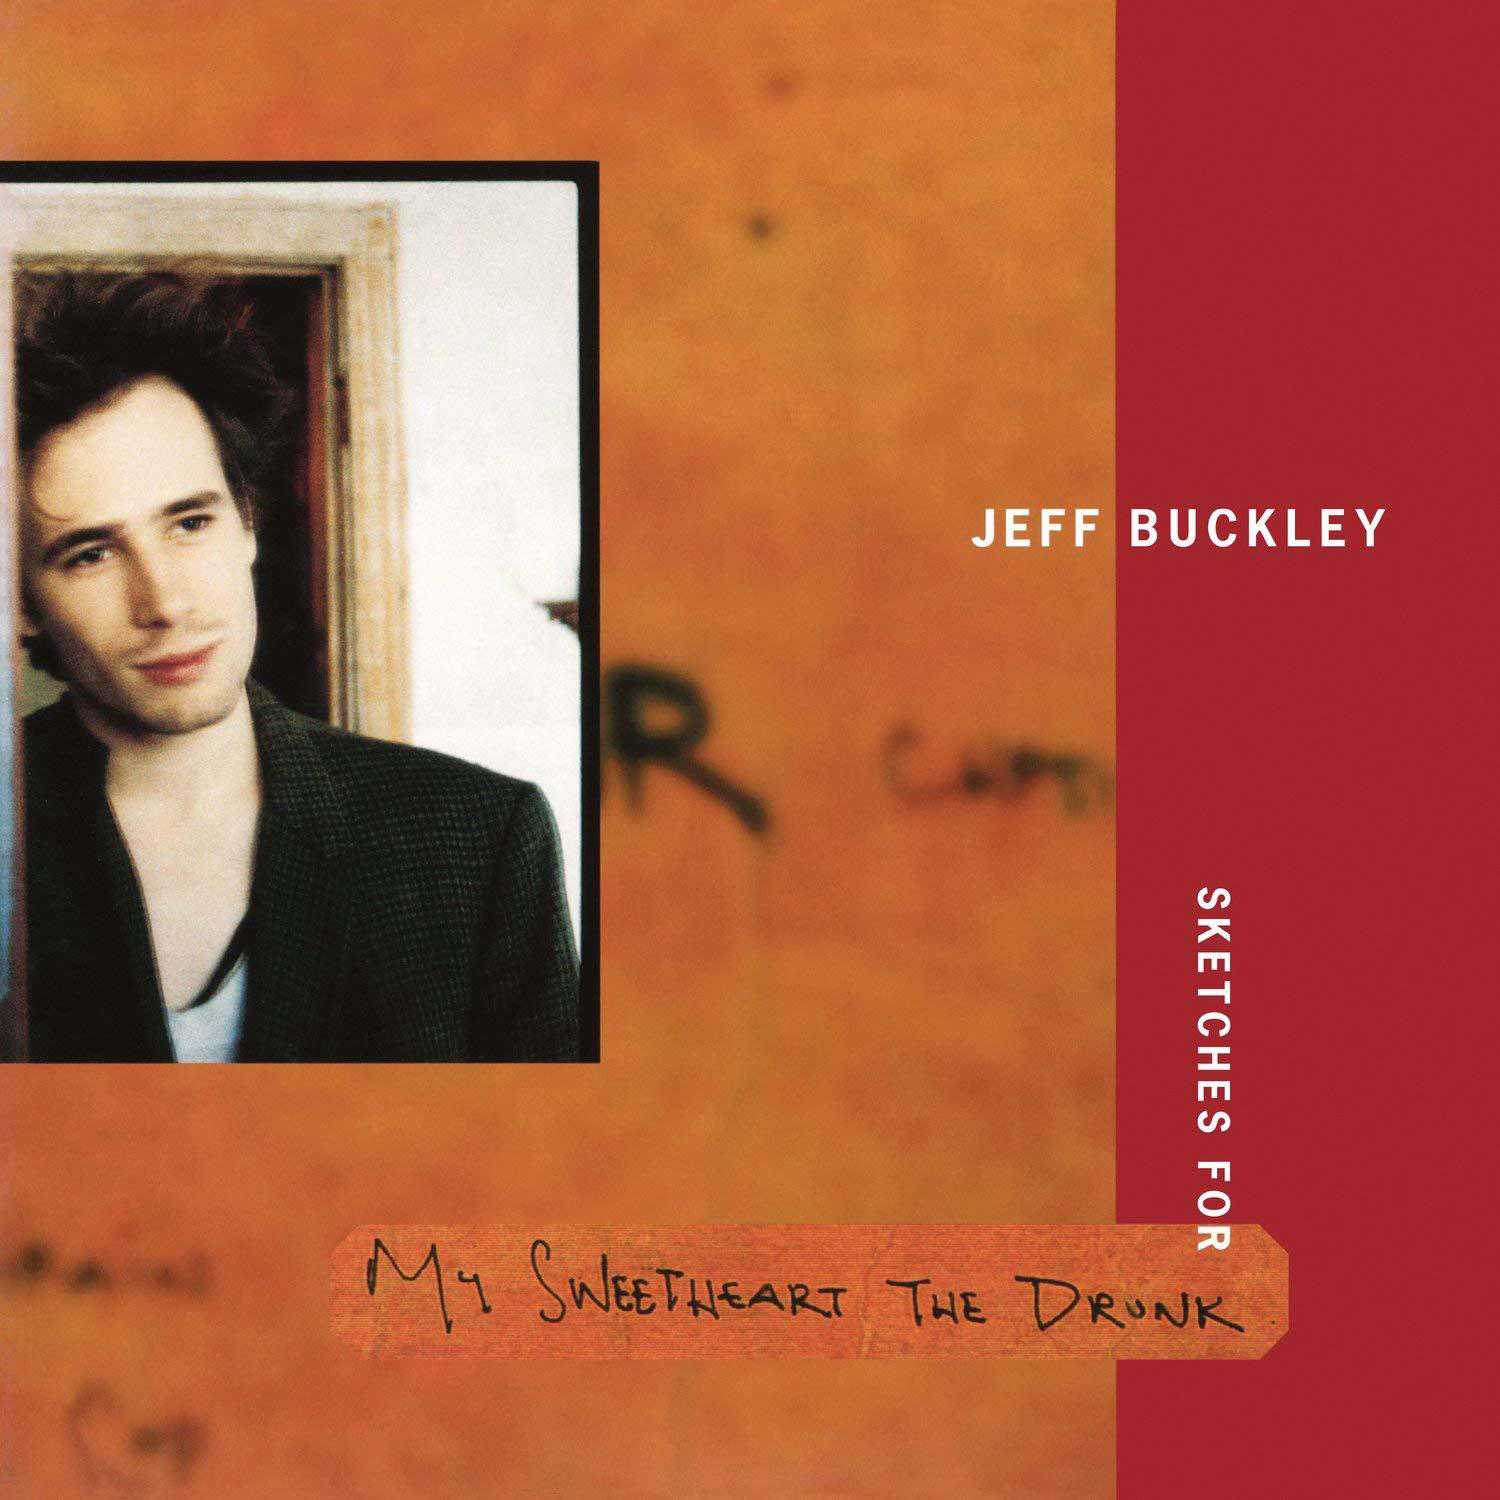 for - (Vinyl) Drunk Buckley The Jeff My Sketches Sweetheart -